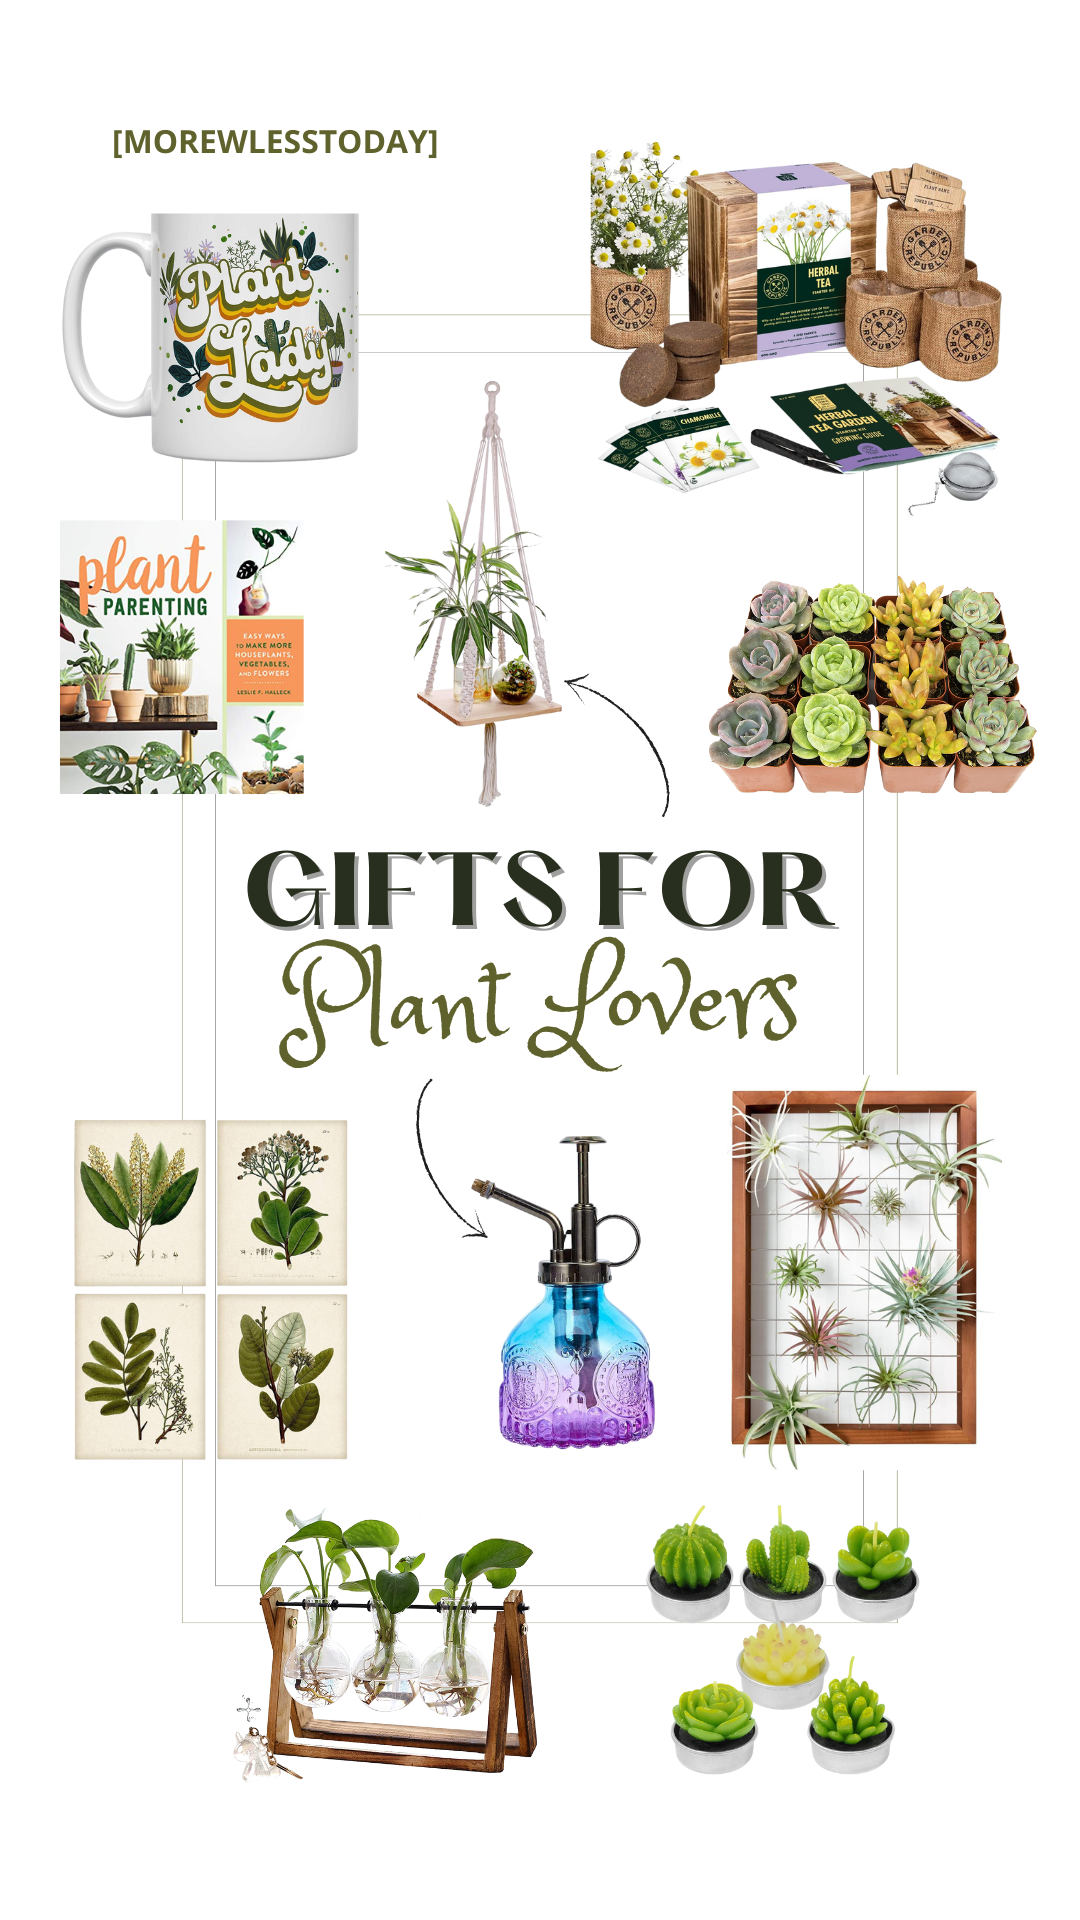 PIN for Gifts for Plant Lovers